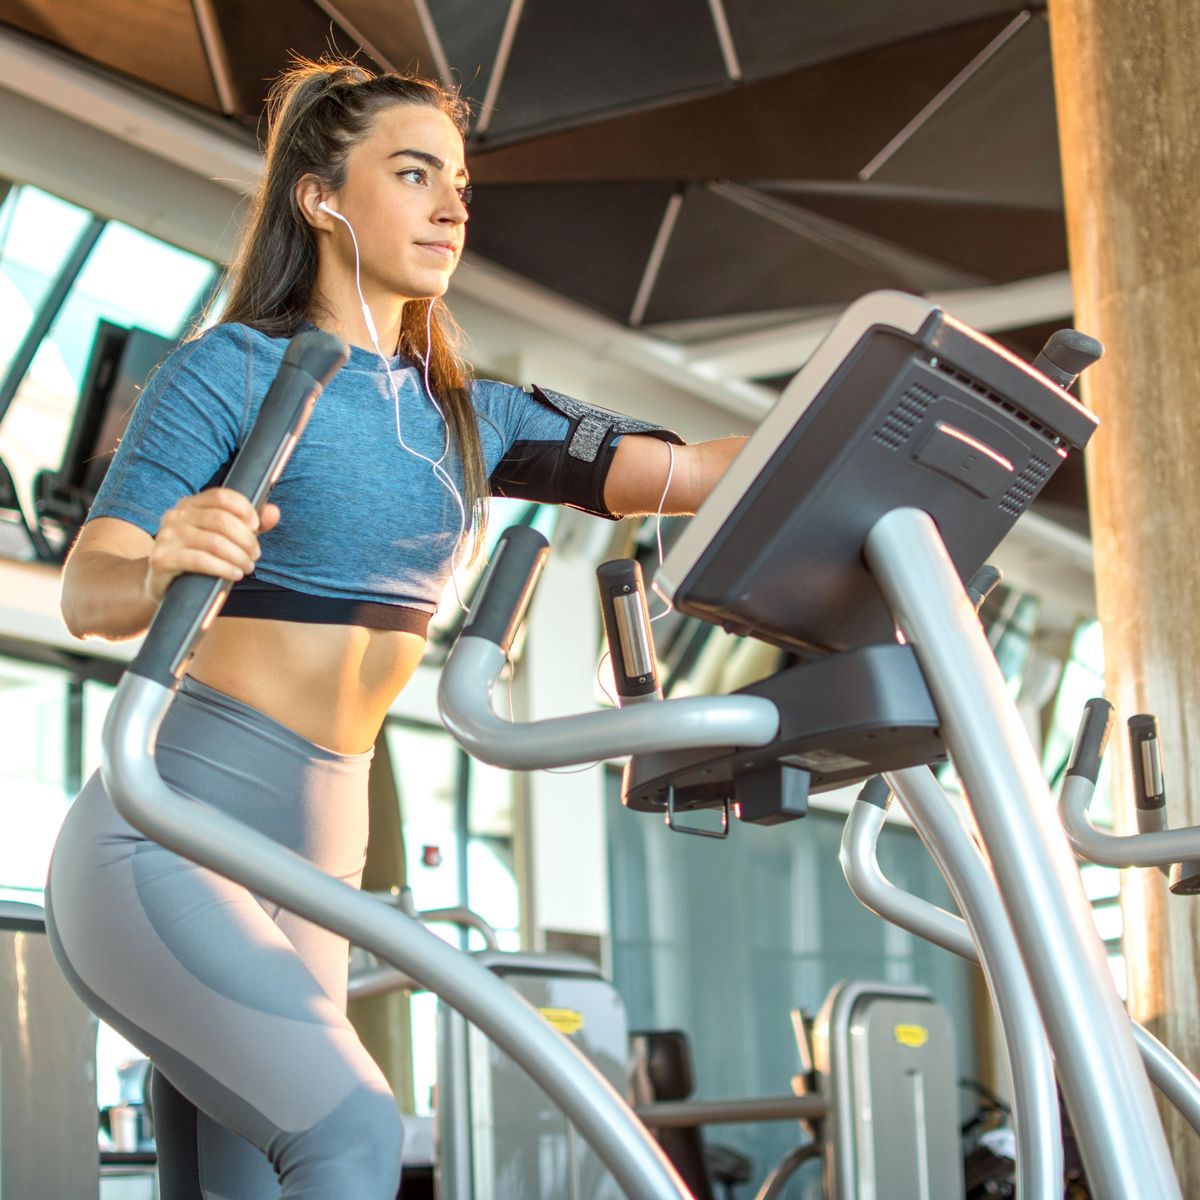 Cross trainer benefits: Why it's a valuable tool for runners